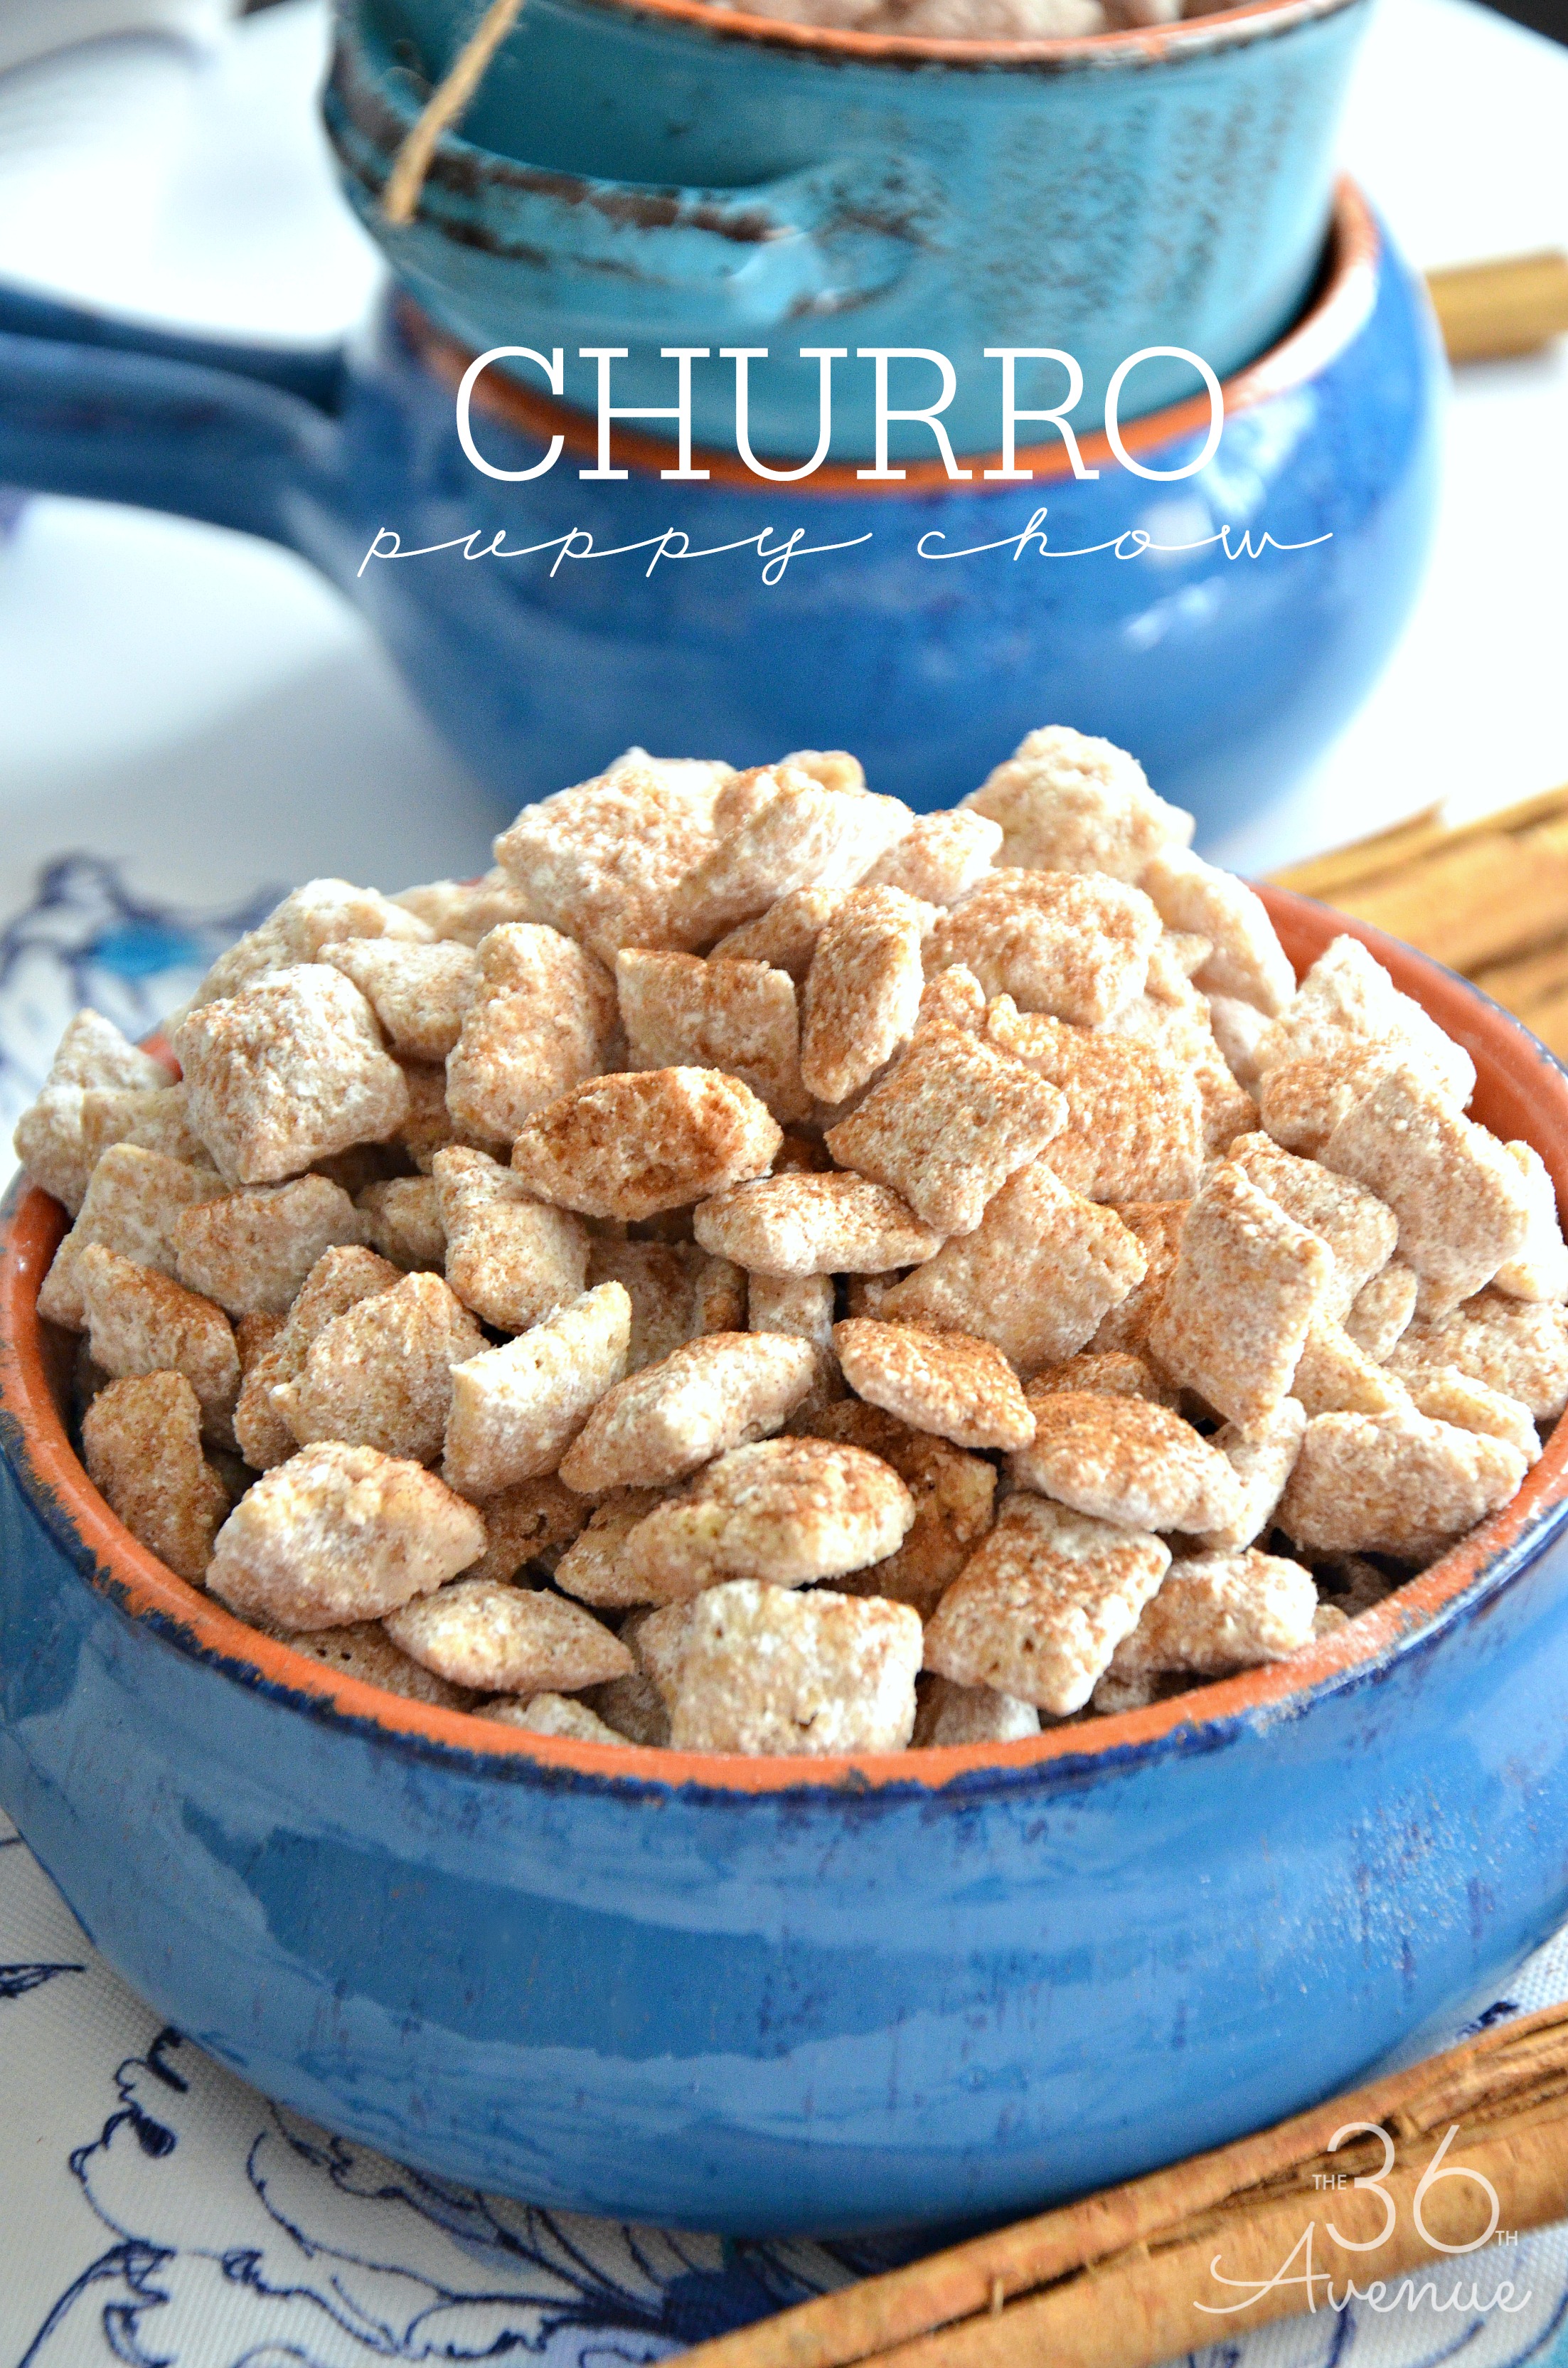 Churro Puppy Chow Recipe - Easy snack inspired by the delicious taste of sugar and cinnamon dipped churros.